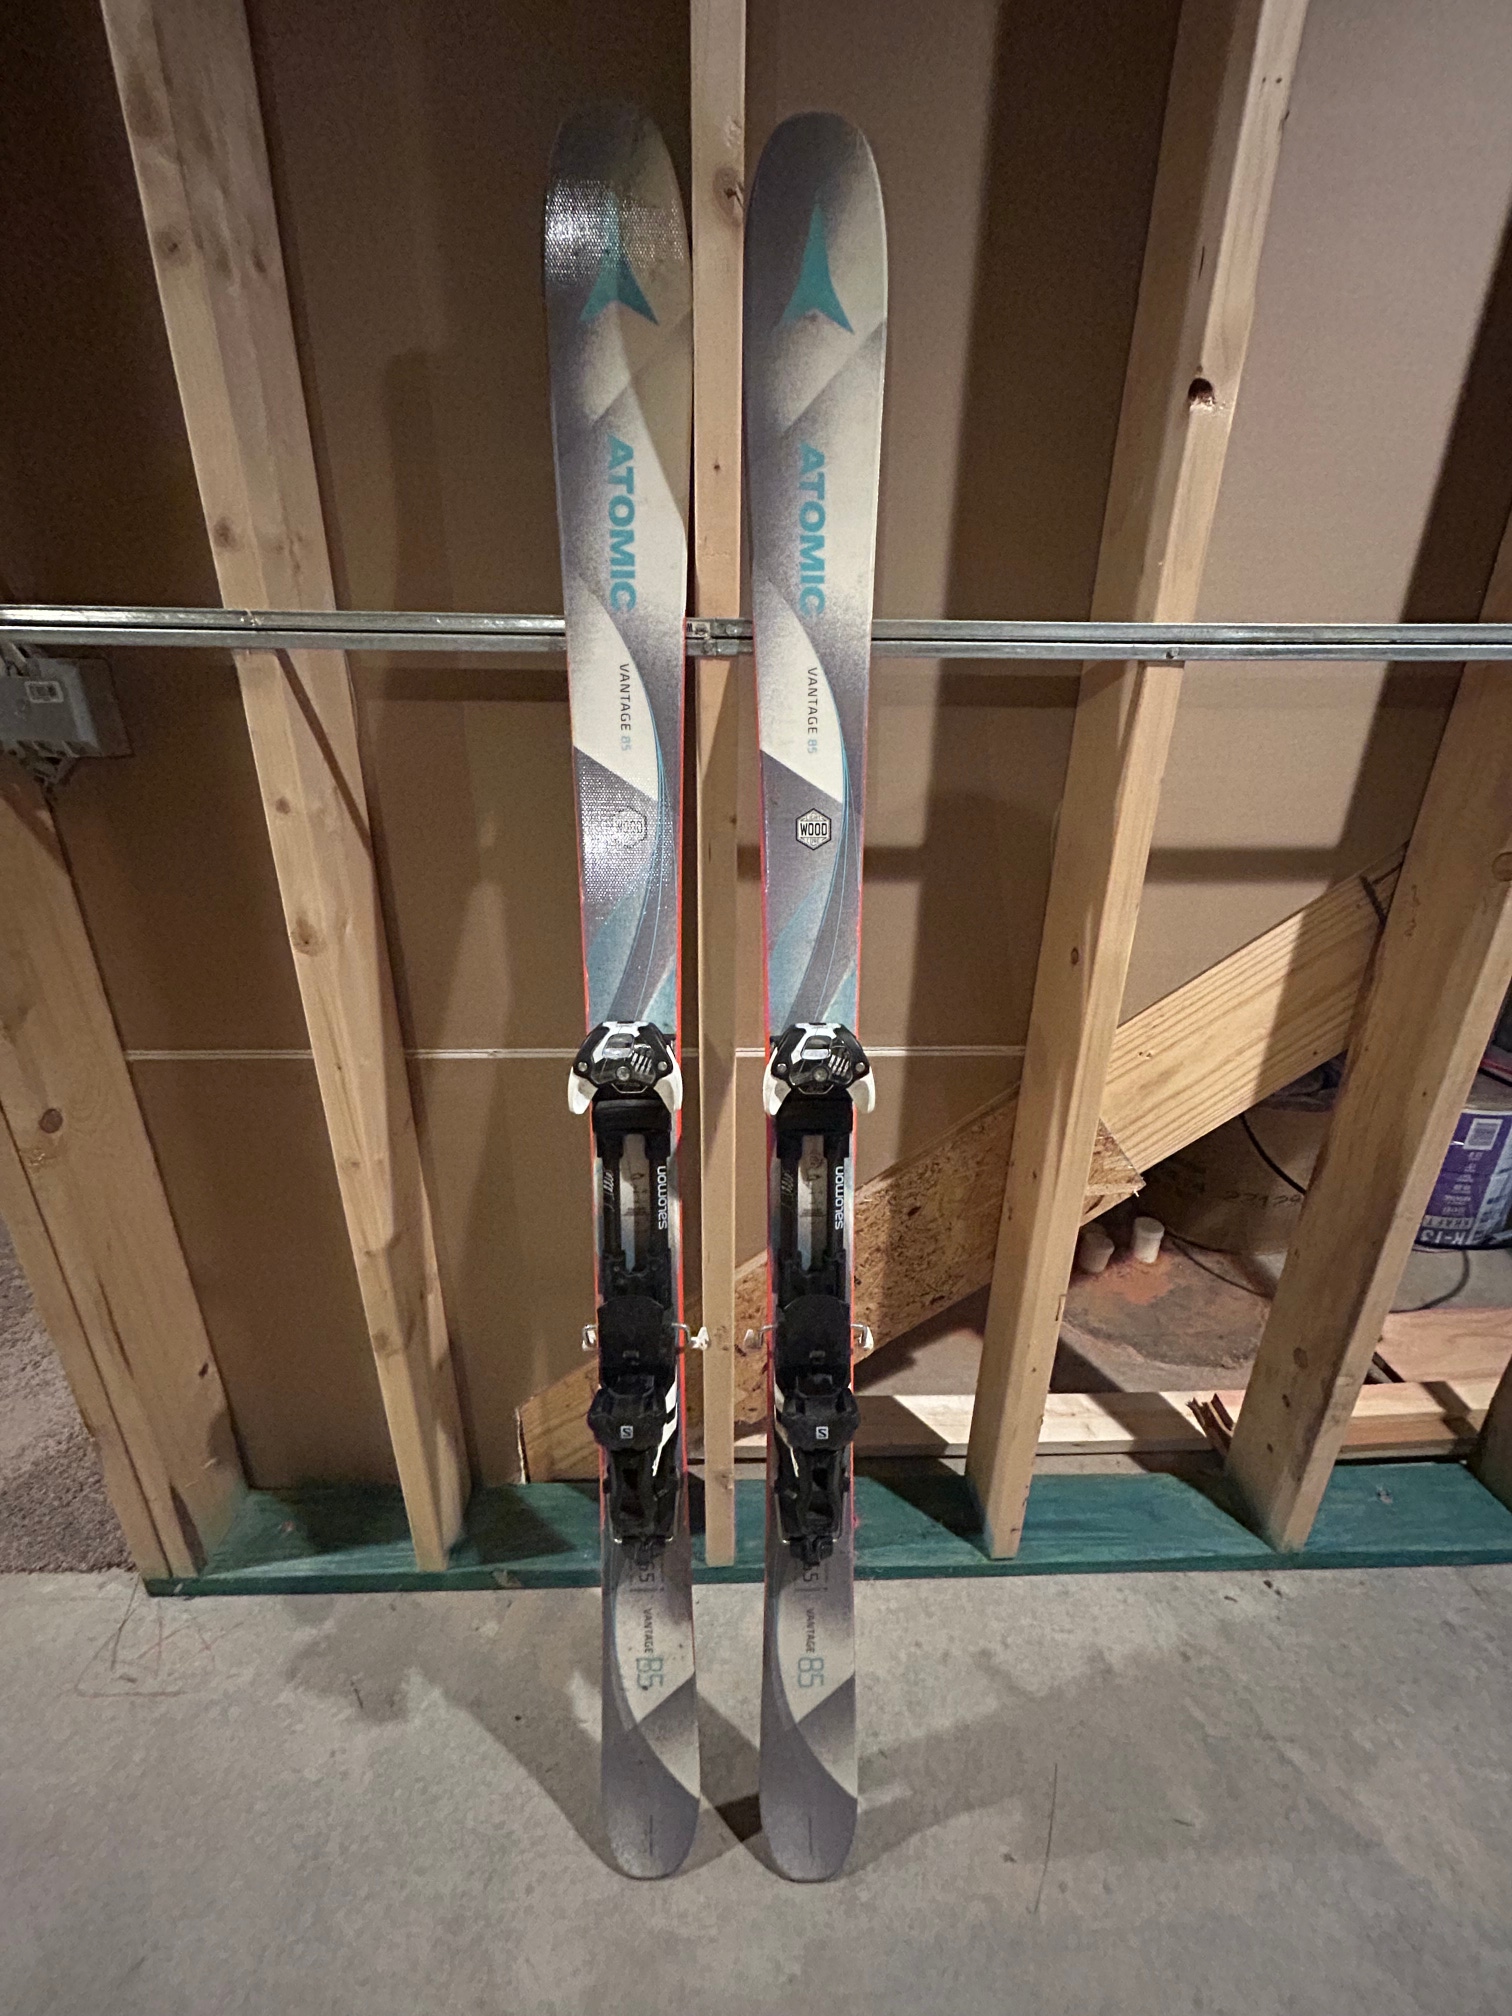 Used Women's 2018 165 cm All Mountain Skis With Bindings